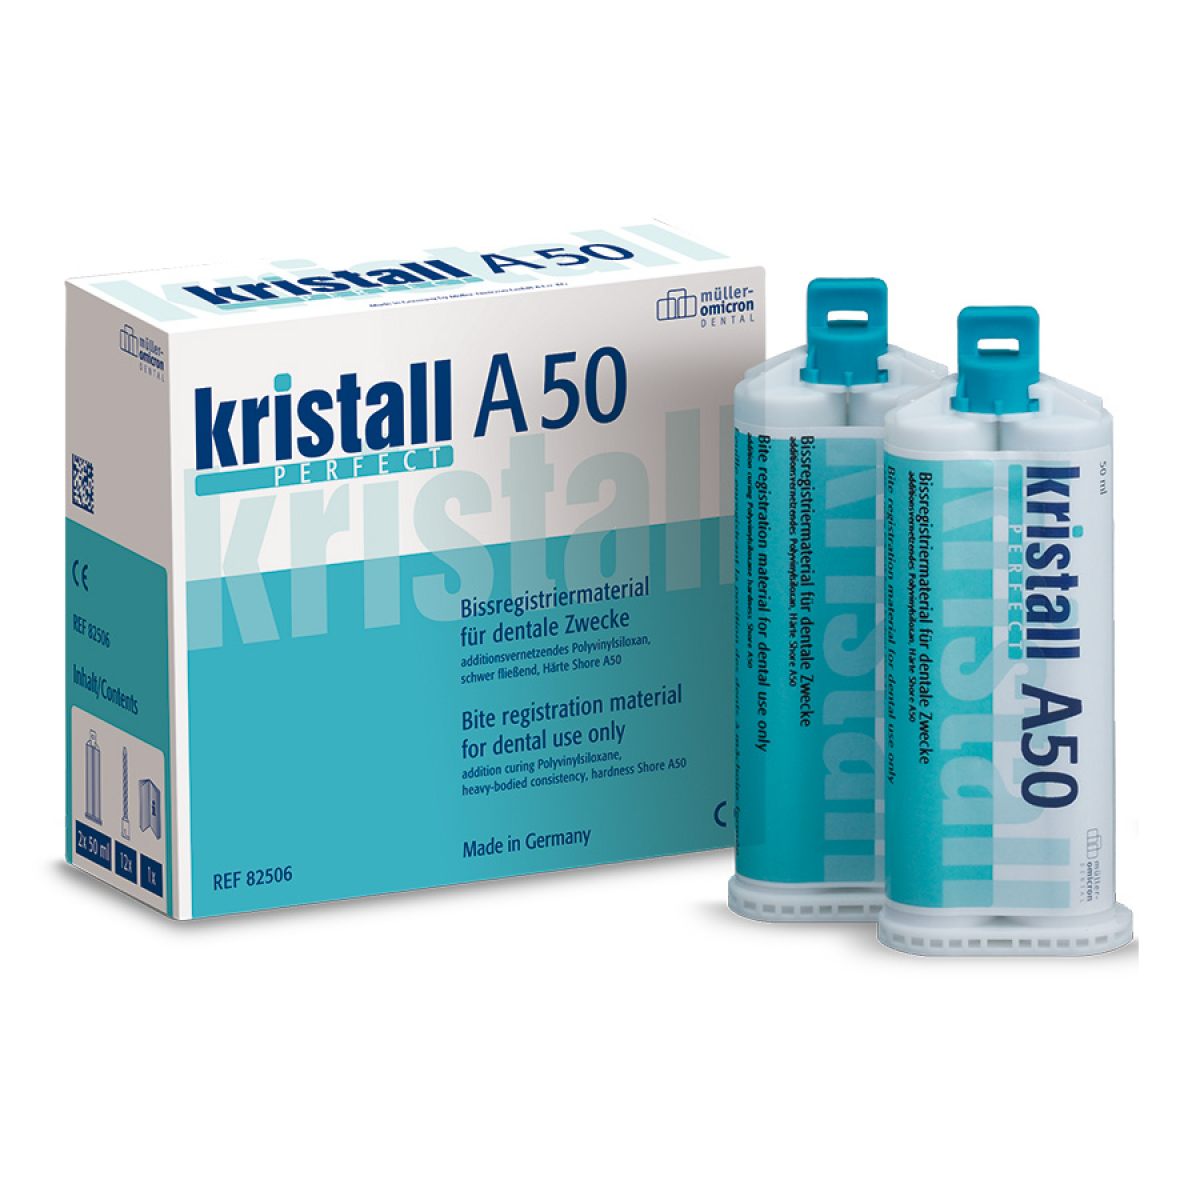 Müller-Omicron - kristall PERFECT A50